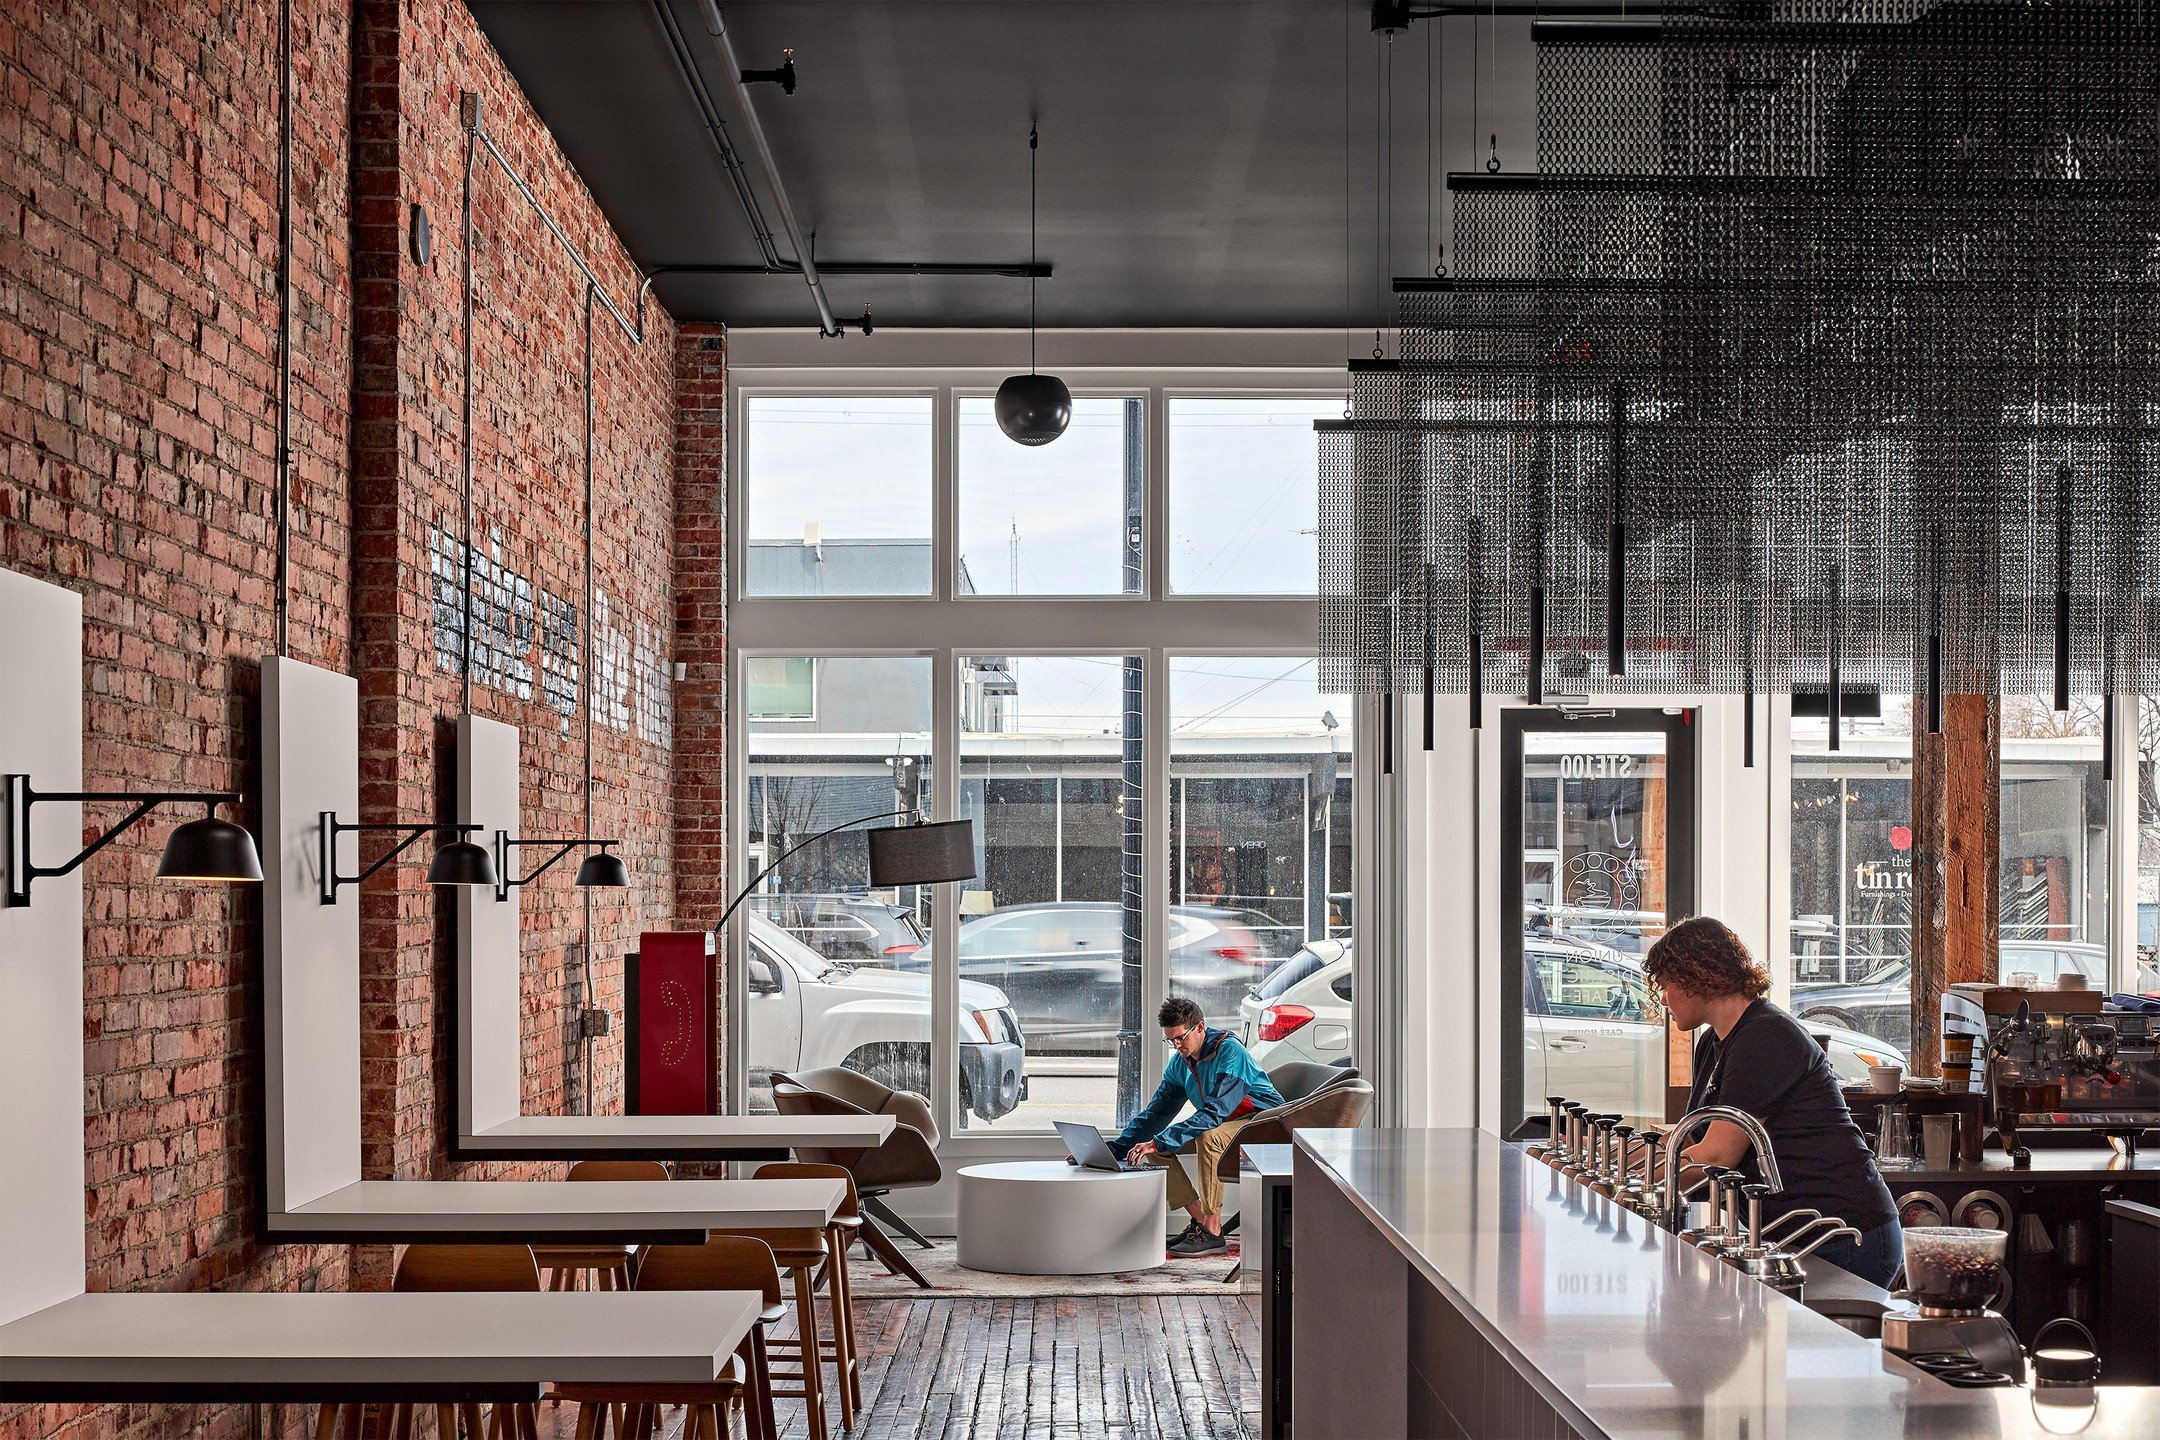 @wakeupcallcoffee cafe and roaster in the Sprague Union District, by Trek.

The project utilized an existing shell, and we carefully carved, pushed and pulled to create various experiences within. 

Architecture / Interiors: @trekarch 
Contractor: @y